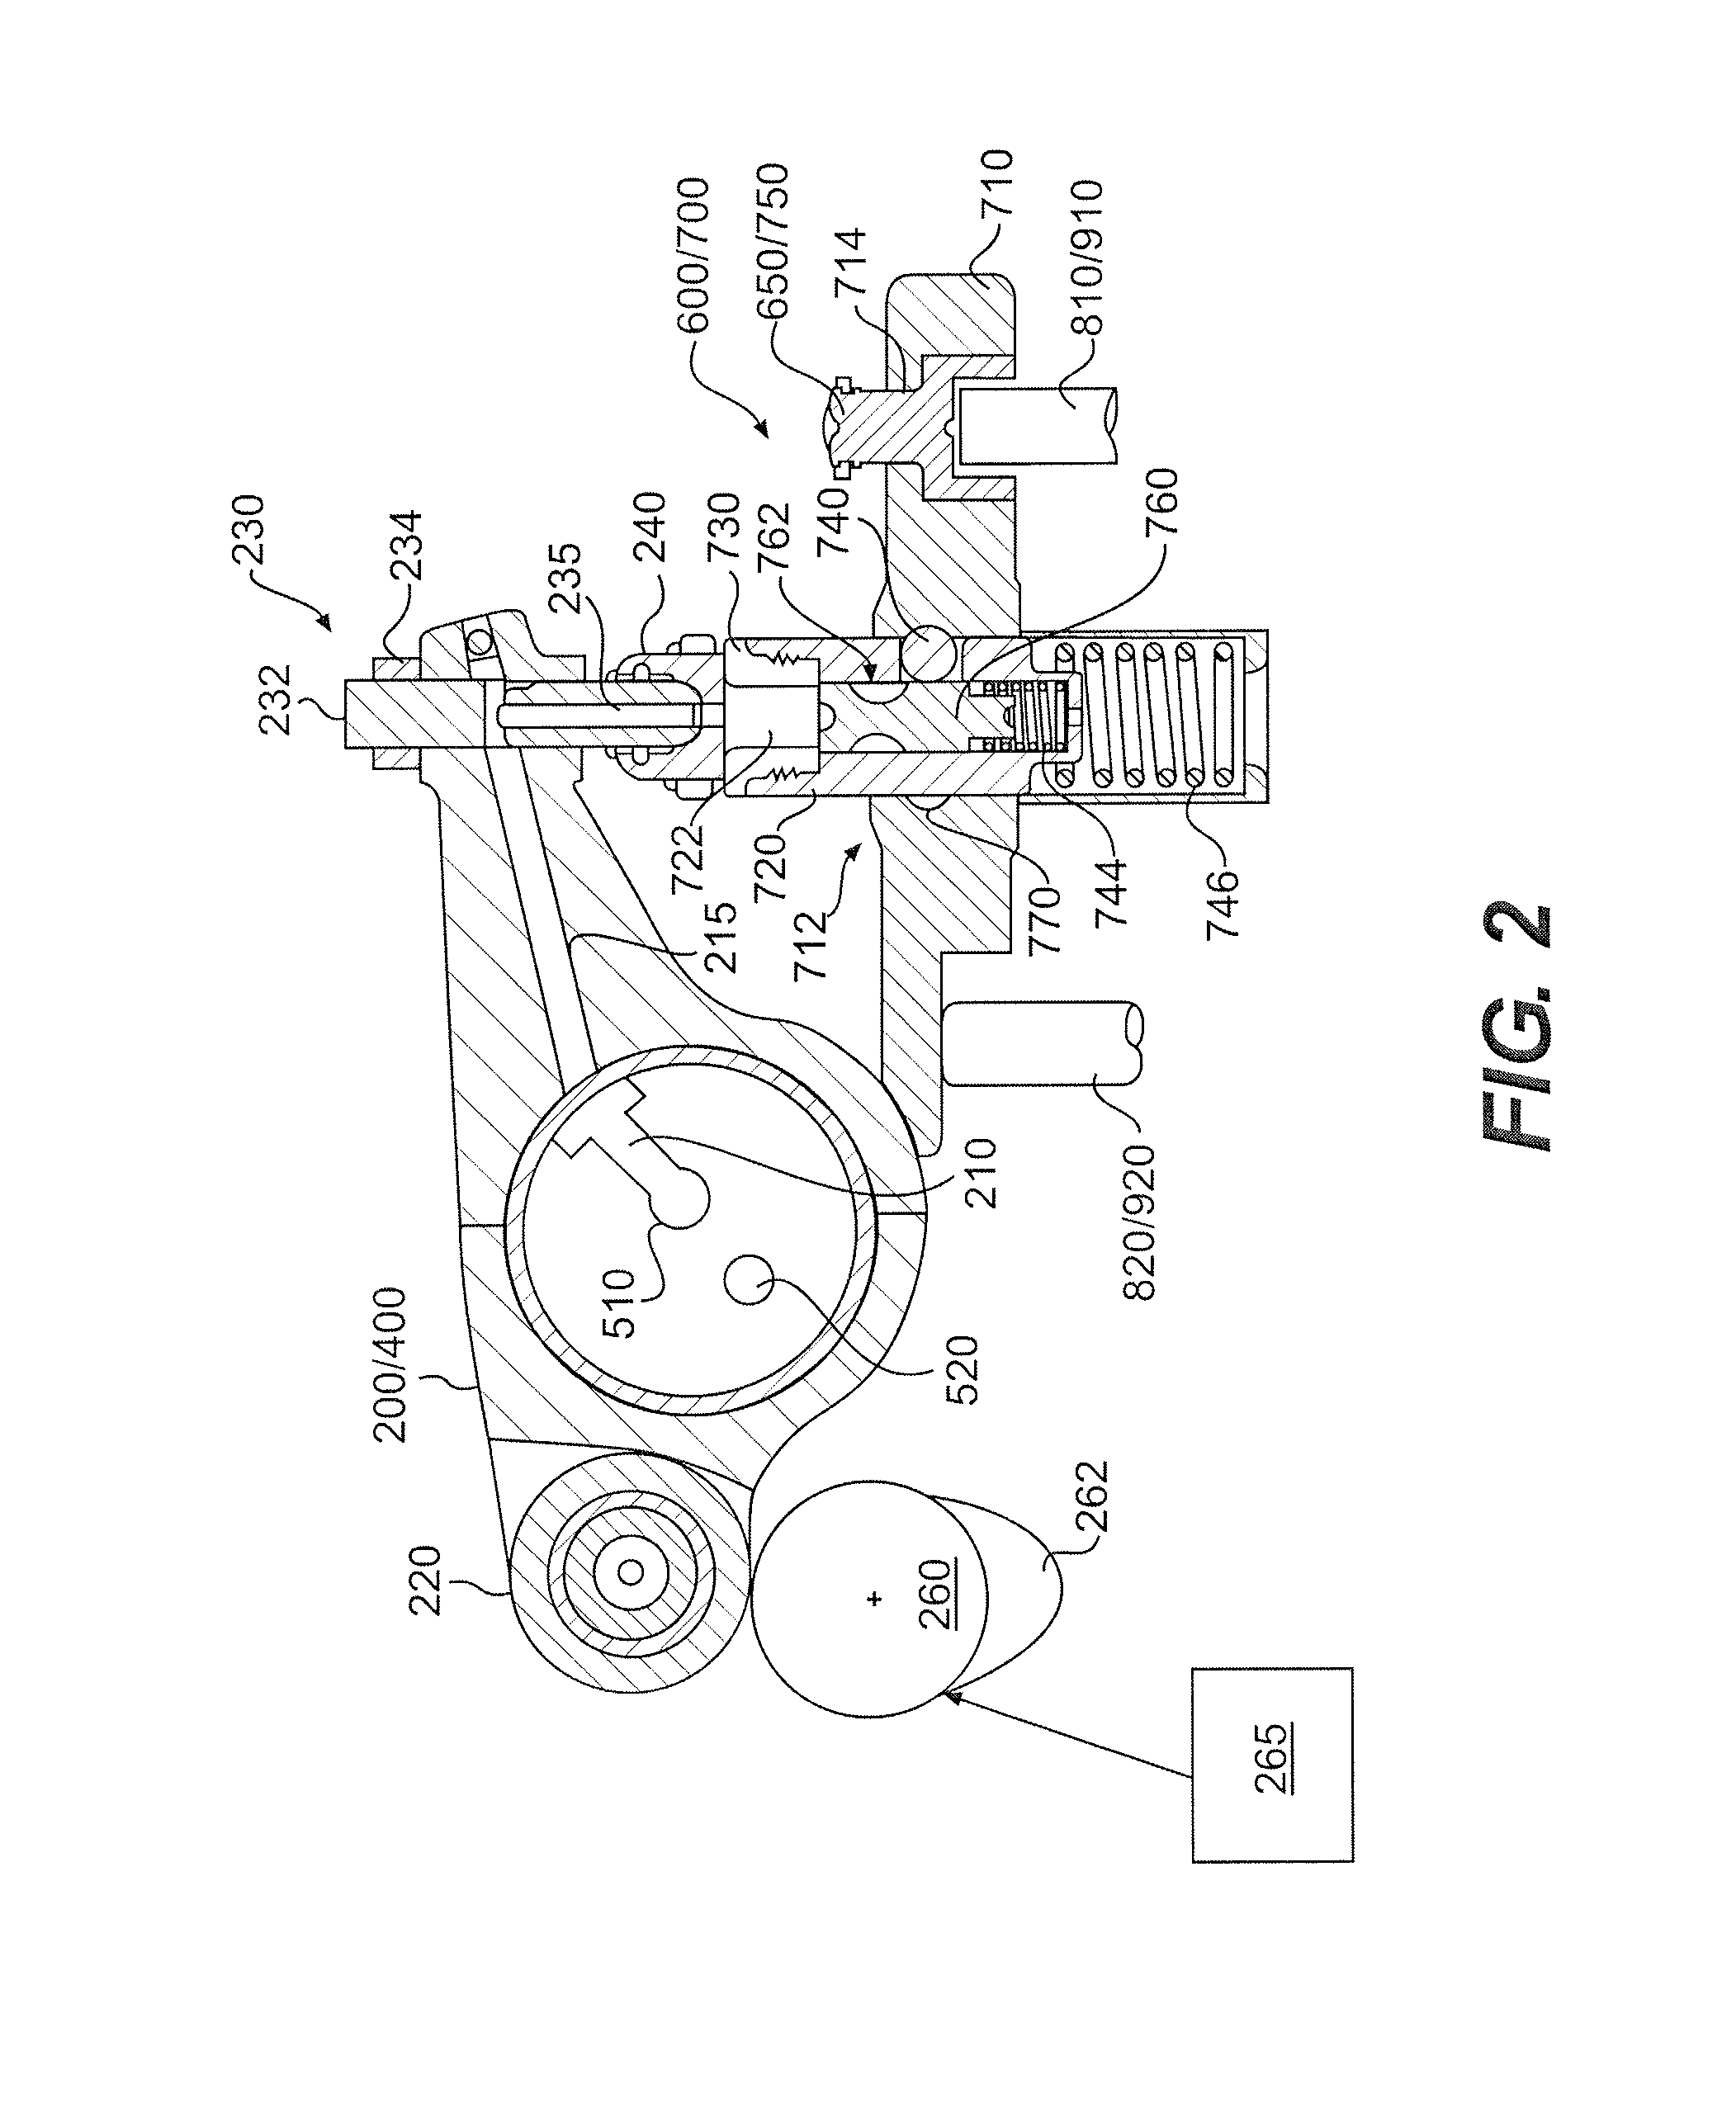 Combined engine braking and positive power engine lost motion valve actuation system